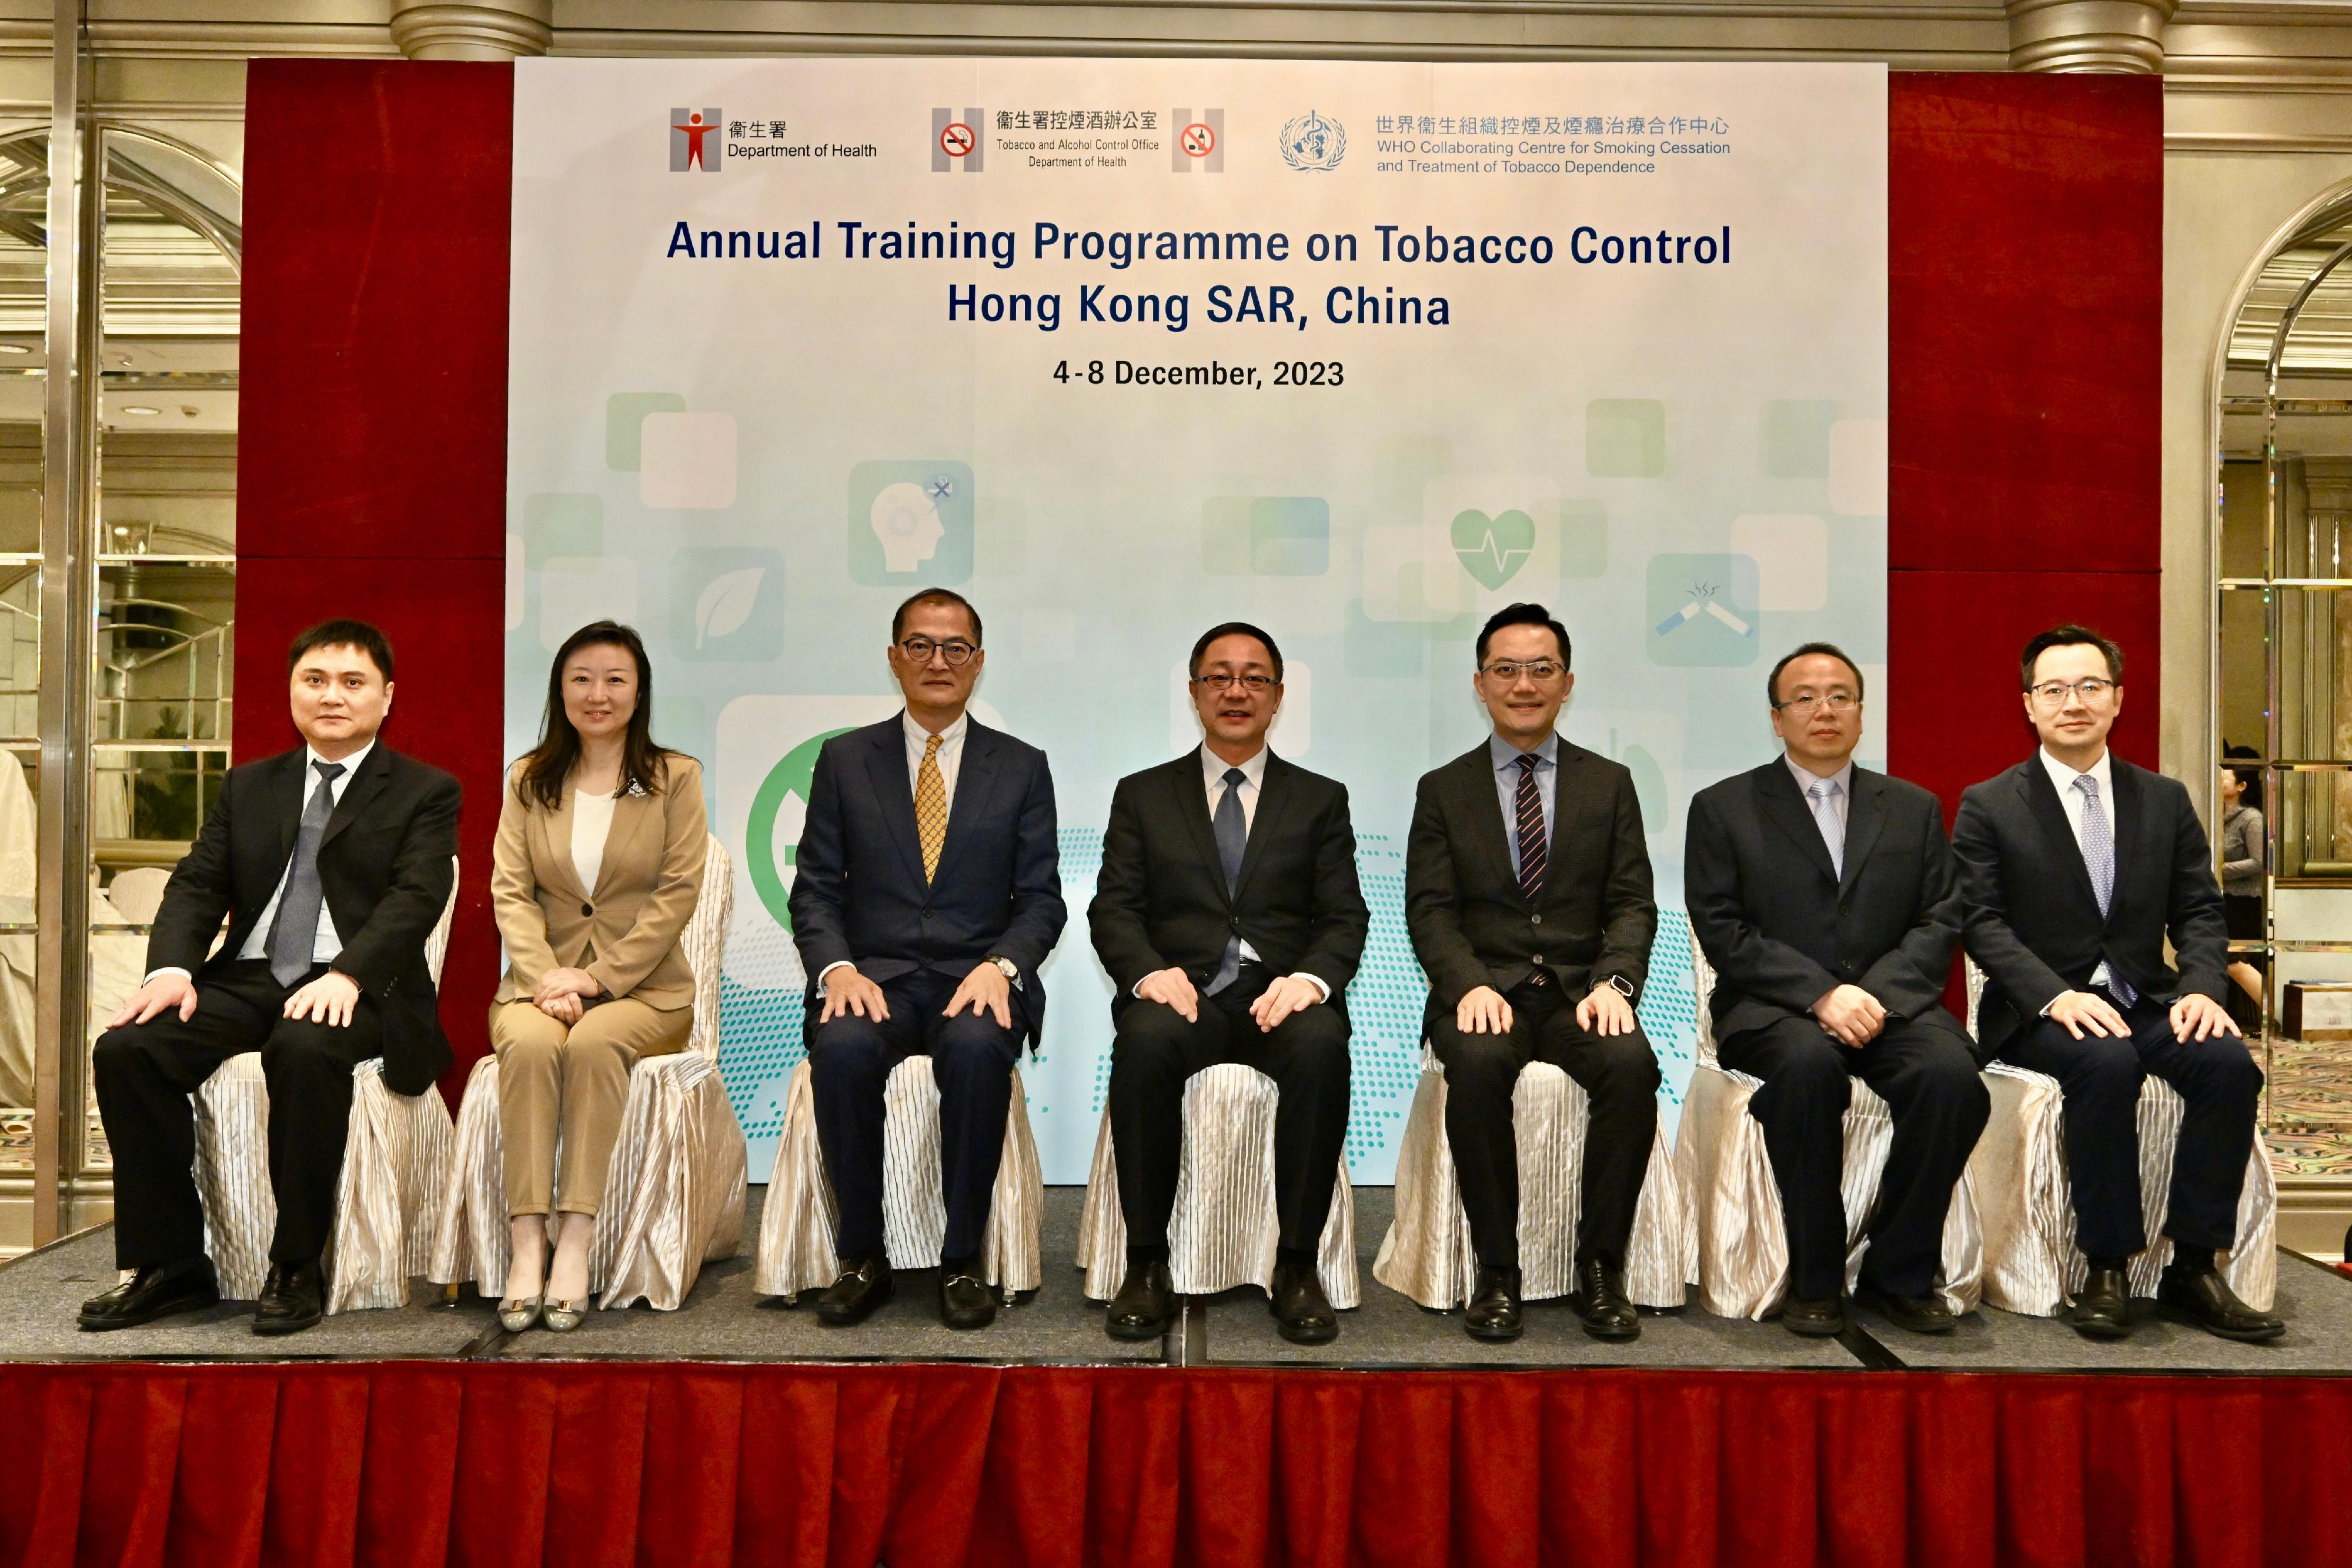 The Secretary for Health, Professor Lo Chung-mau (third left), and Vice-minister of the National Health Commission Mr Yu Xuejun (centre) attend the closing ceremony of the Annual Training Programme on Tobacco Control 2023 organised by the Tobacco and Alcohol Control Office of the Department of Health this afternoon (December 7) with the Director of Health, Dr Ronald Lam (third right), and other guests at the ceremony.